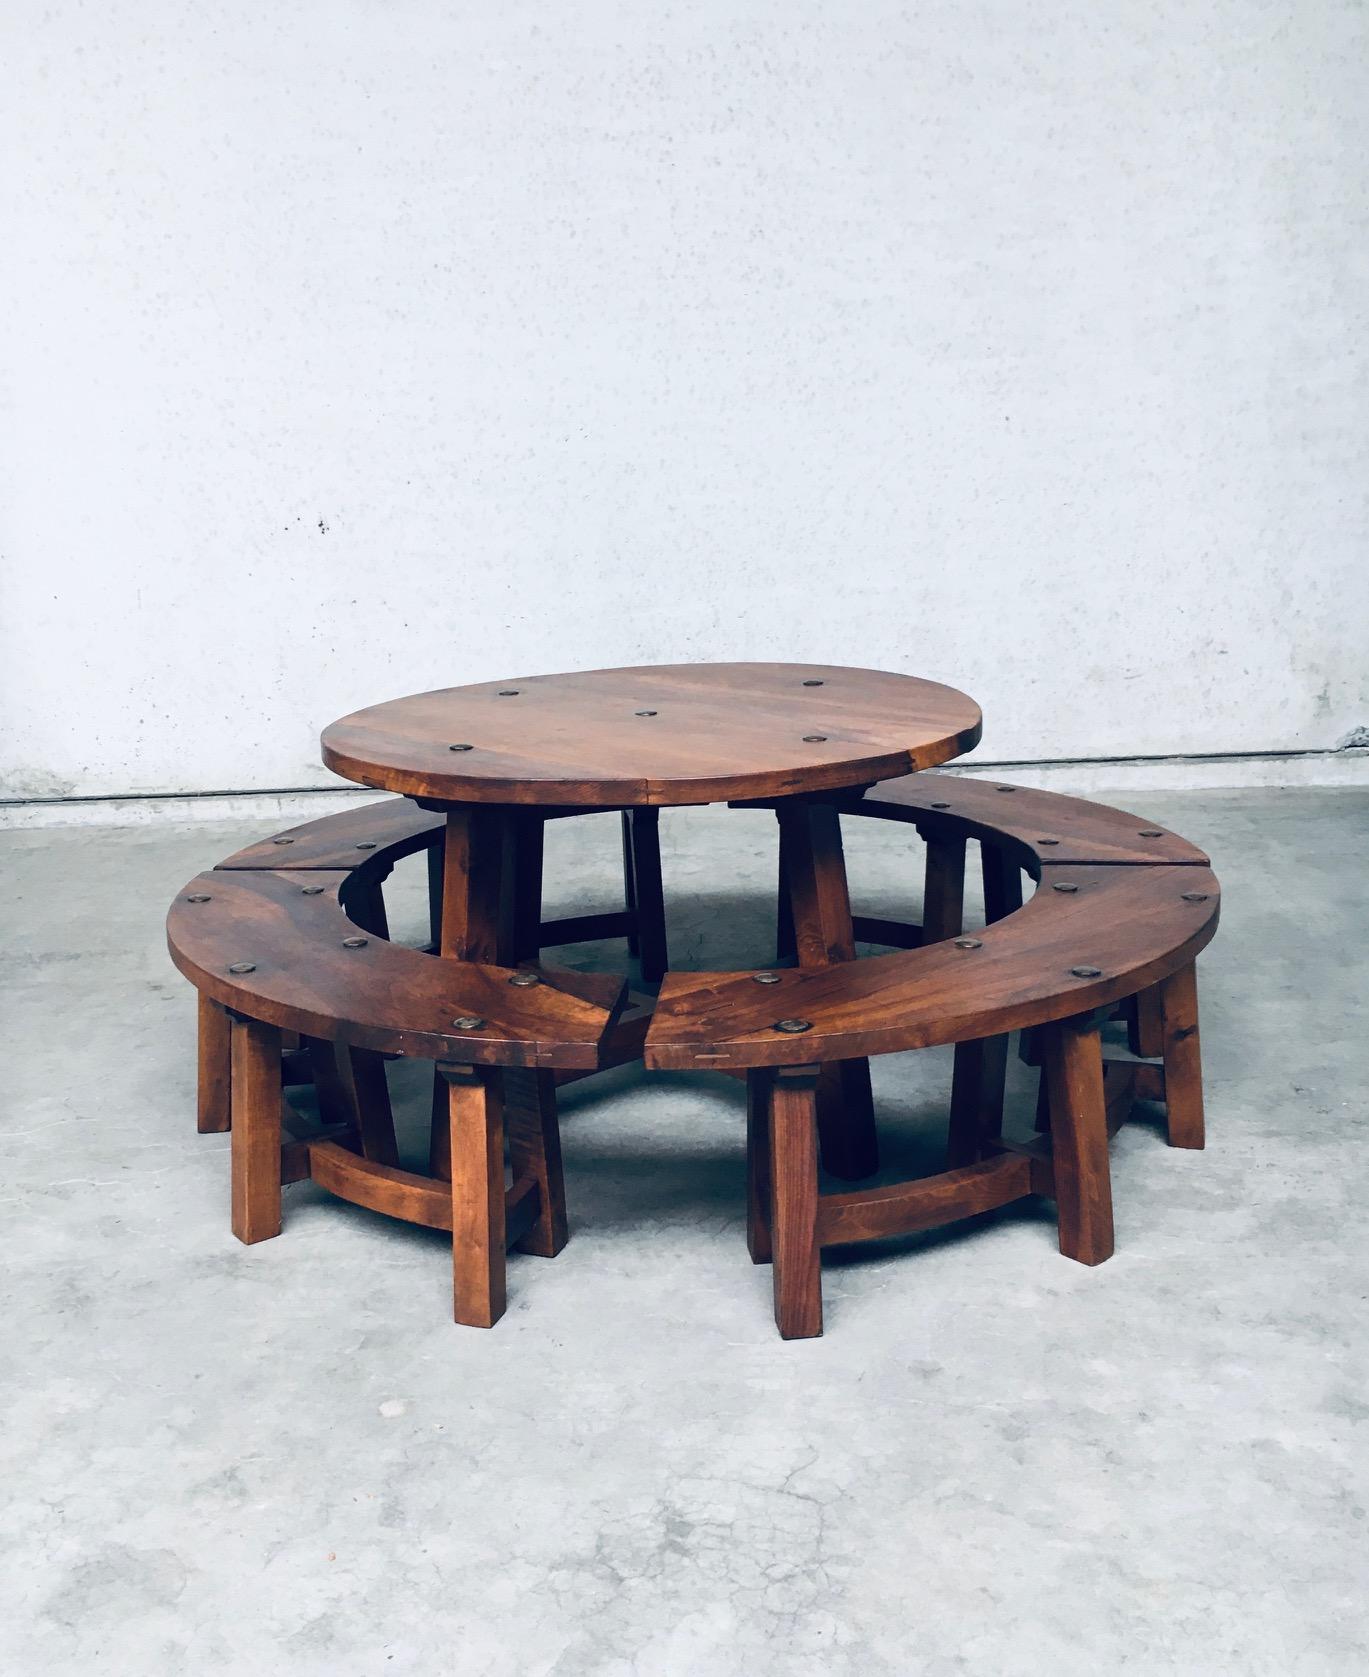 Vintage Midcentury Chalet style round dining table with four matching benches. Made in France, 1950's / 60's period. In the style of Pierre Chapo designer. Hand crafted in solid hardwood (Elm or Ash) with trestle bases and forged iron hardware on